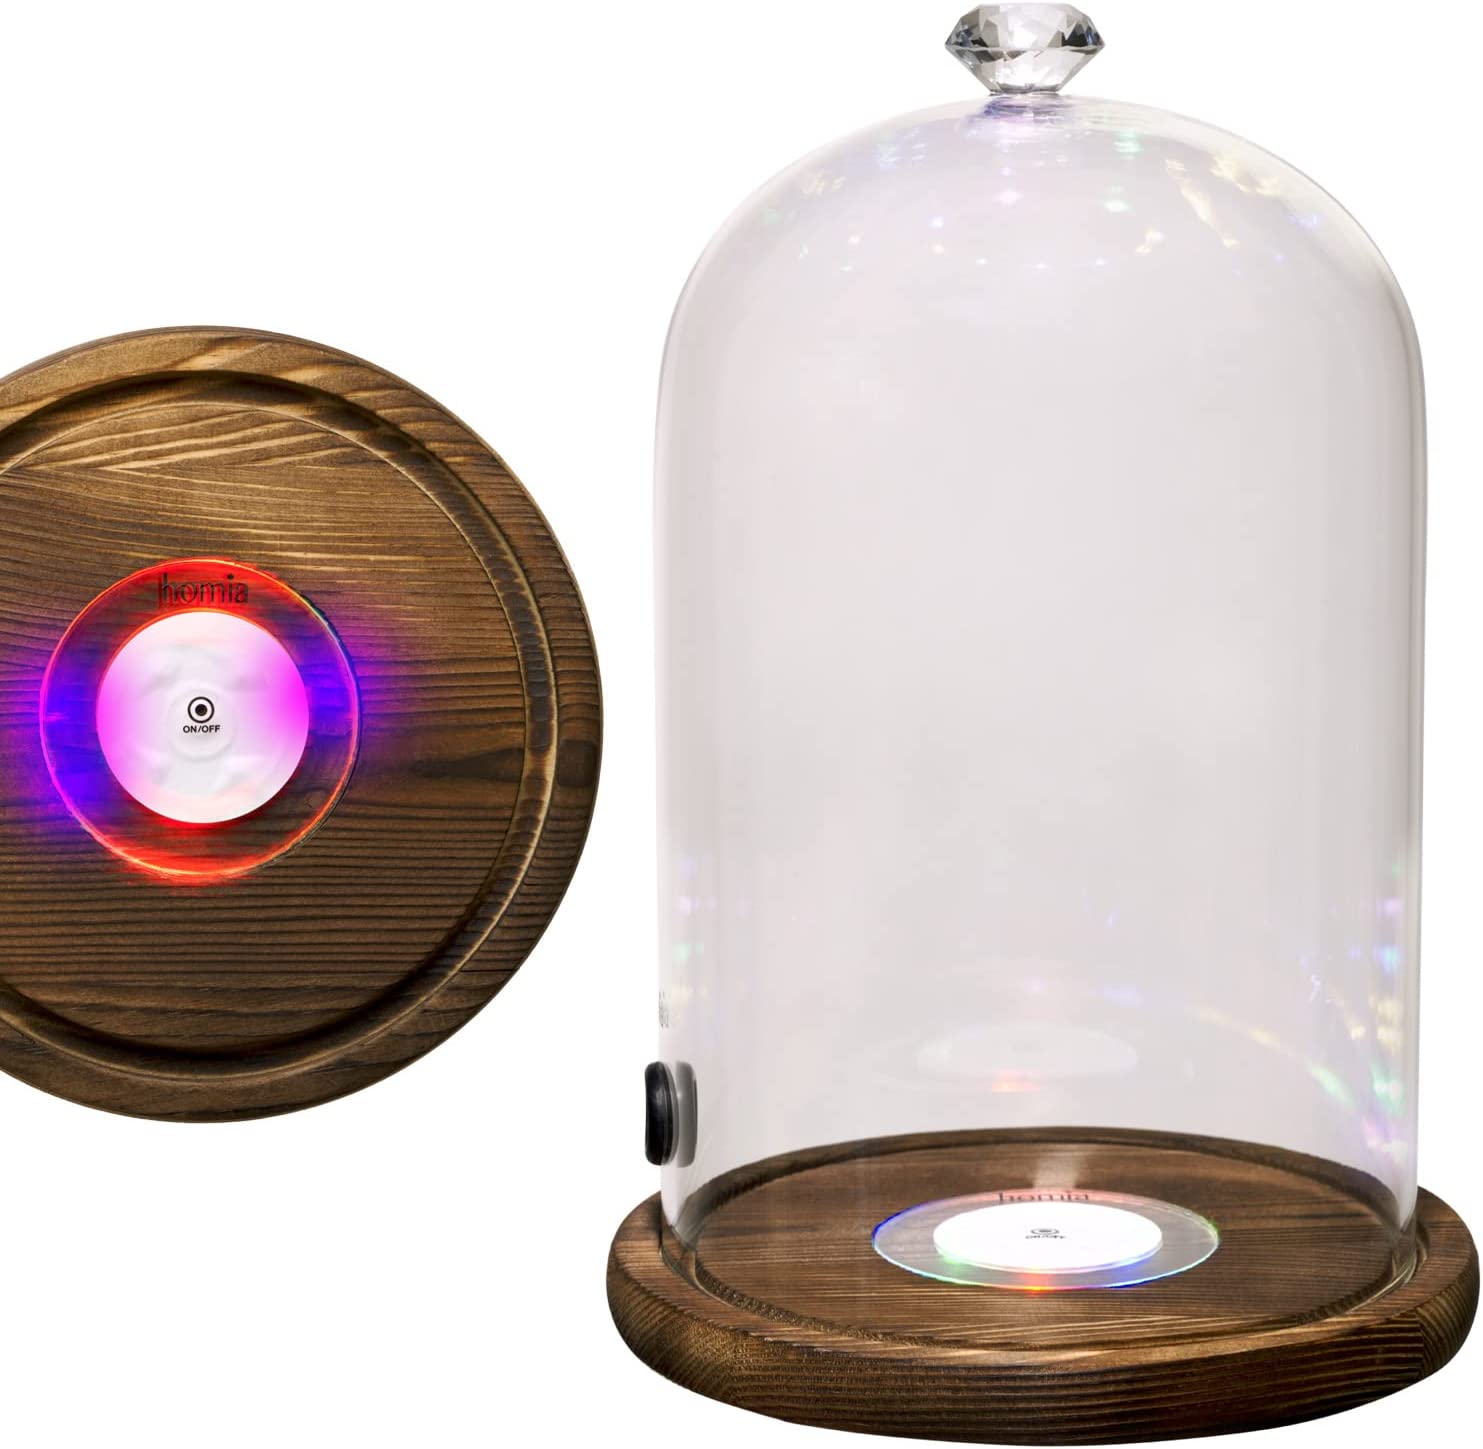 Tall Glass Dome with center LED lights Wooden Base